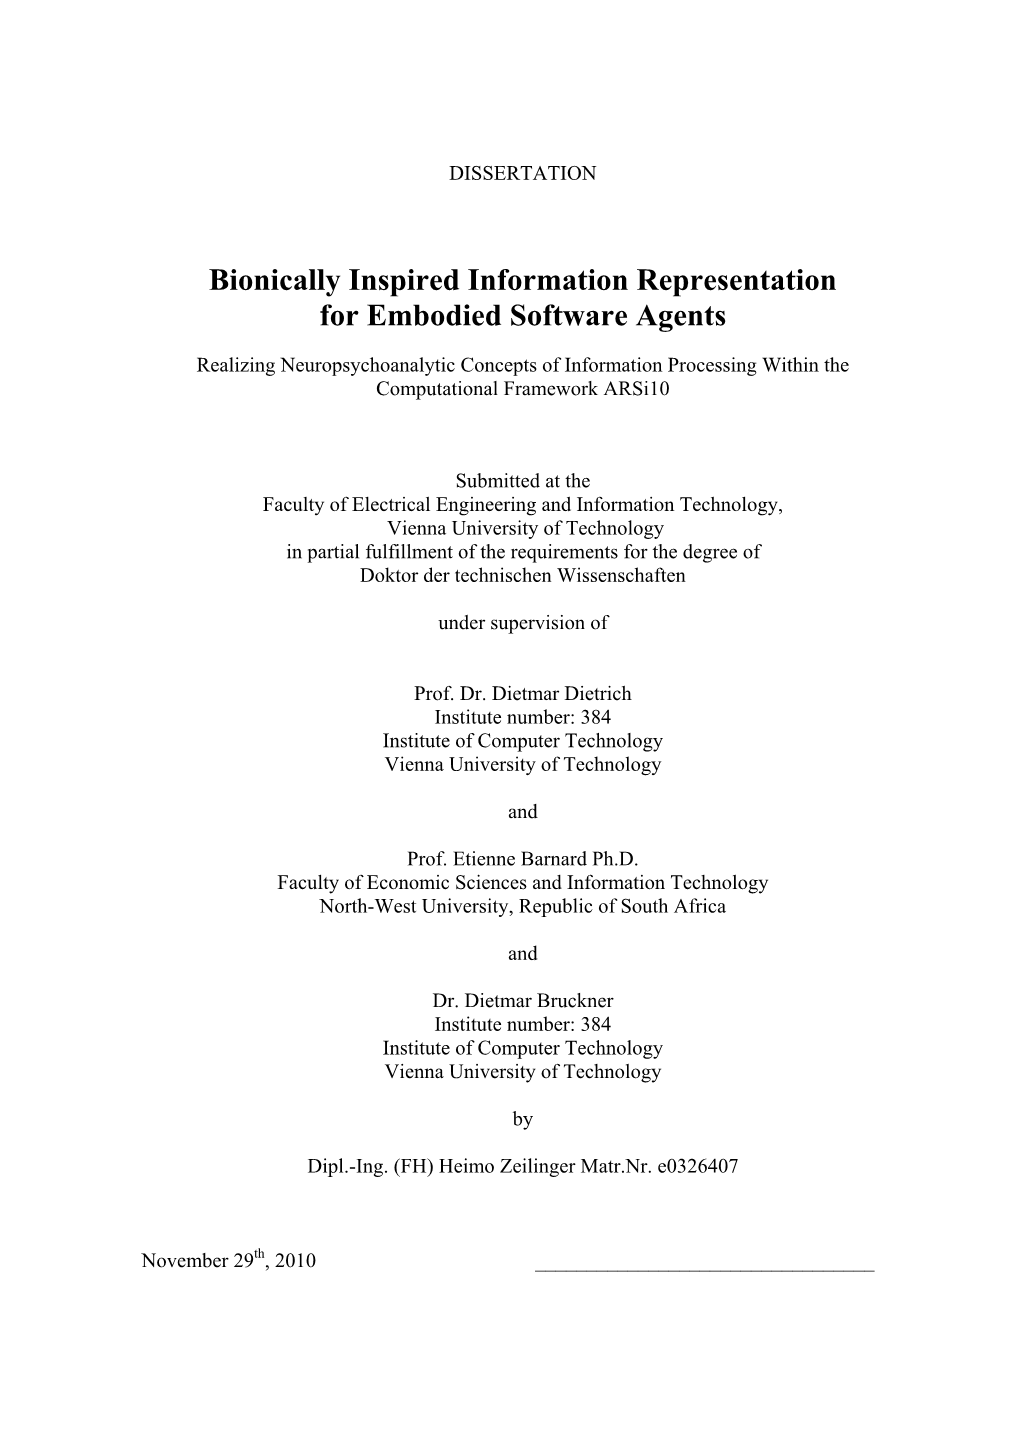 (Pdf), 2011: Bionically Inspired Information Representation For